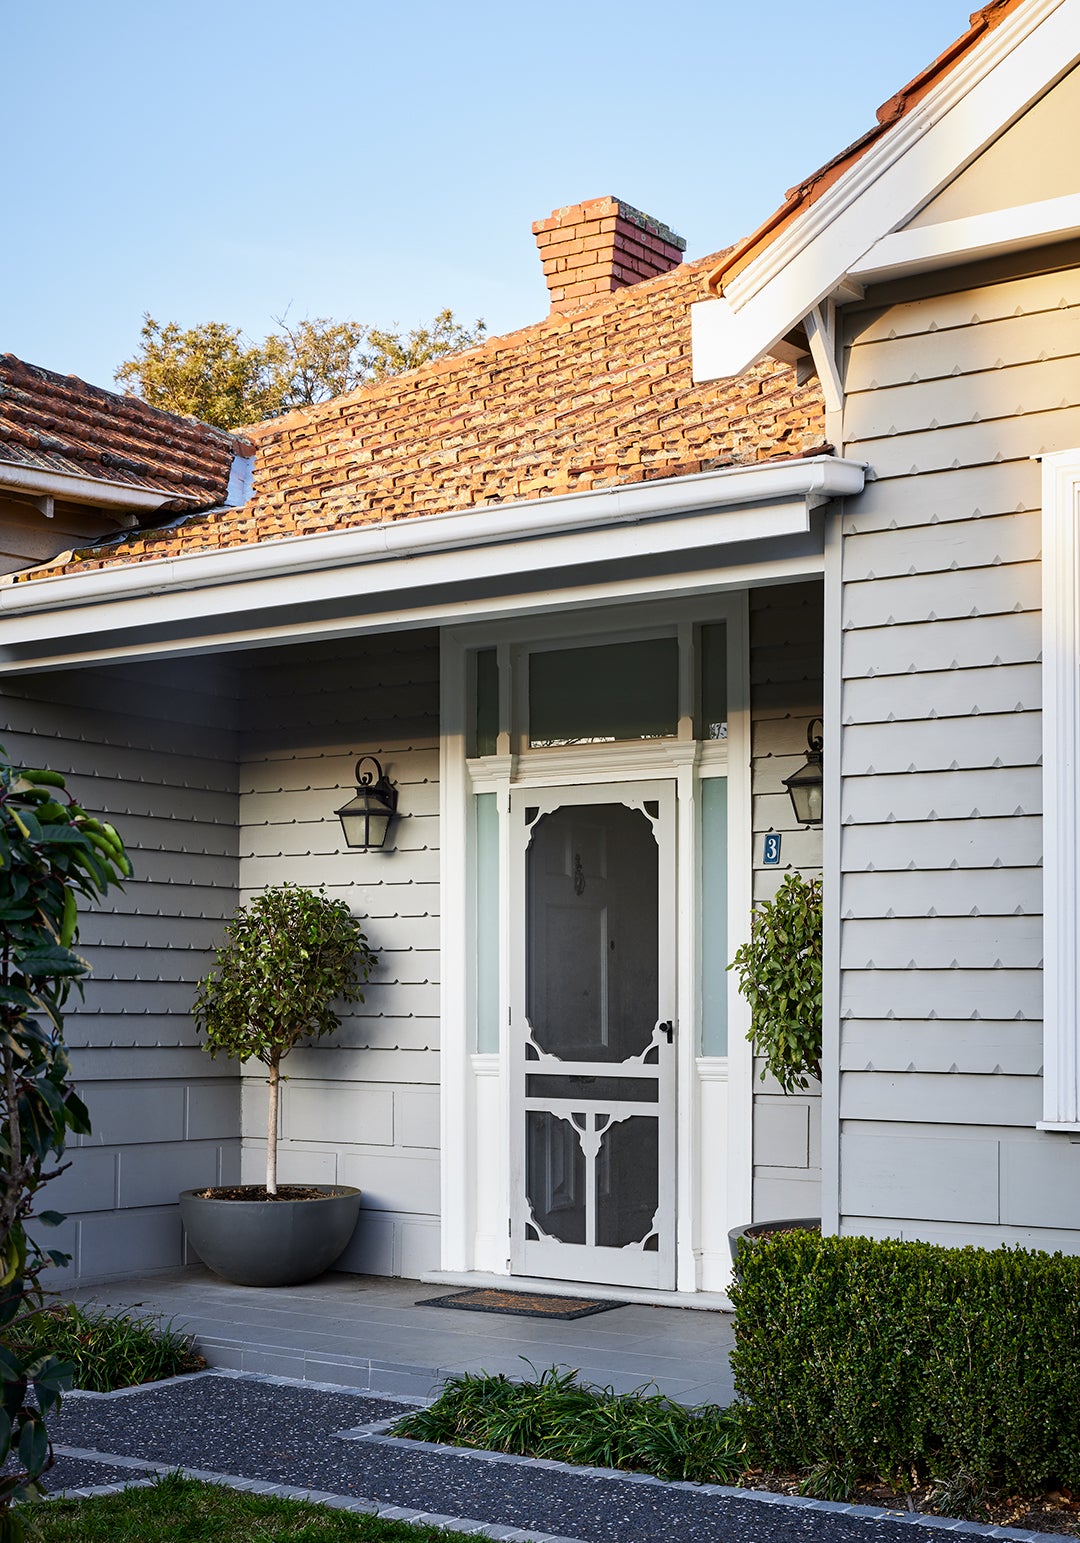 Front door entrance of Edwardian home in Melbourne with potted trees outside